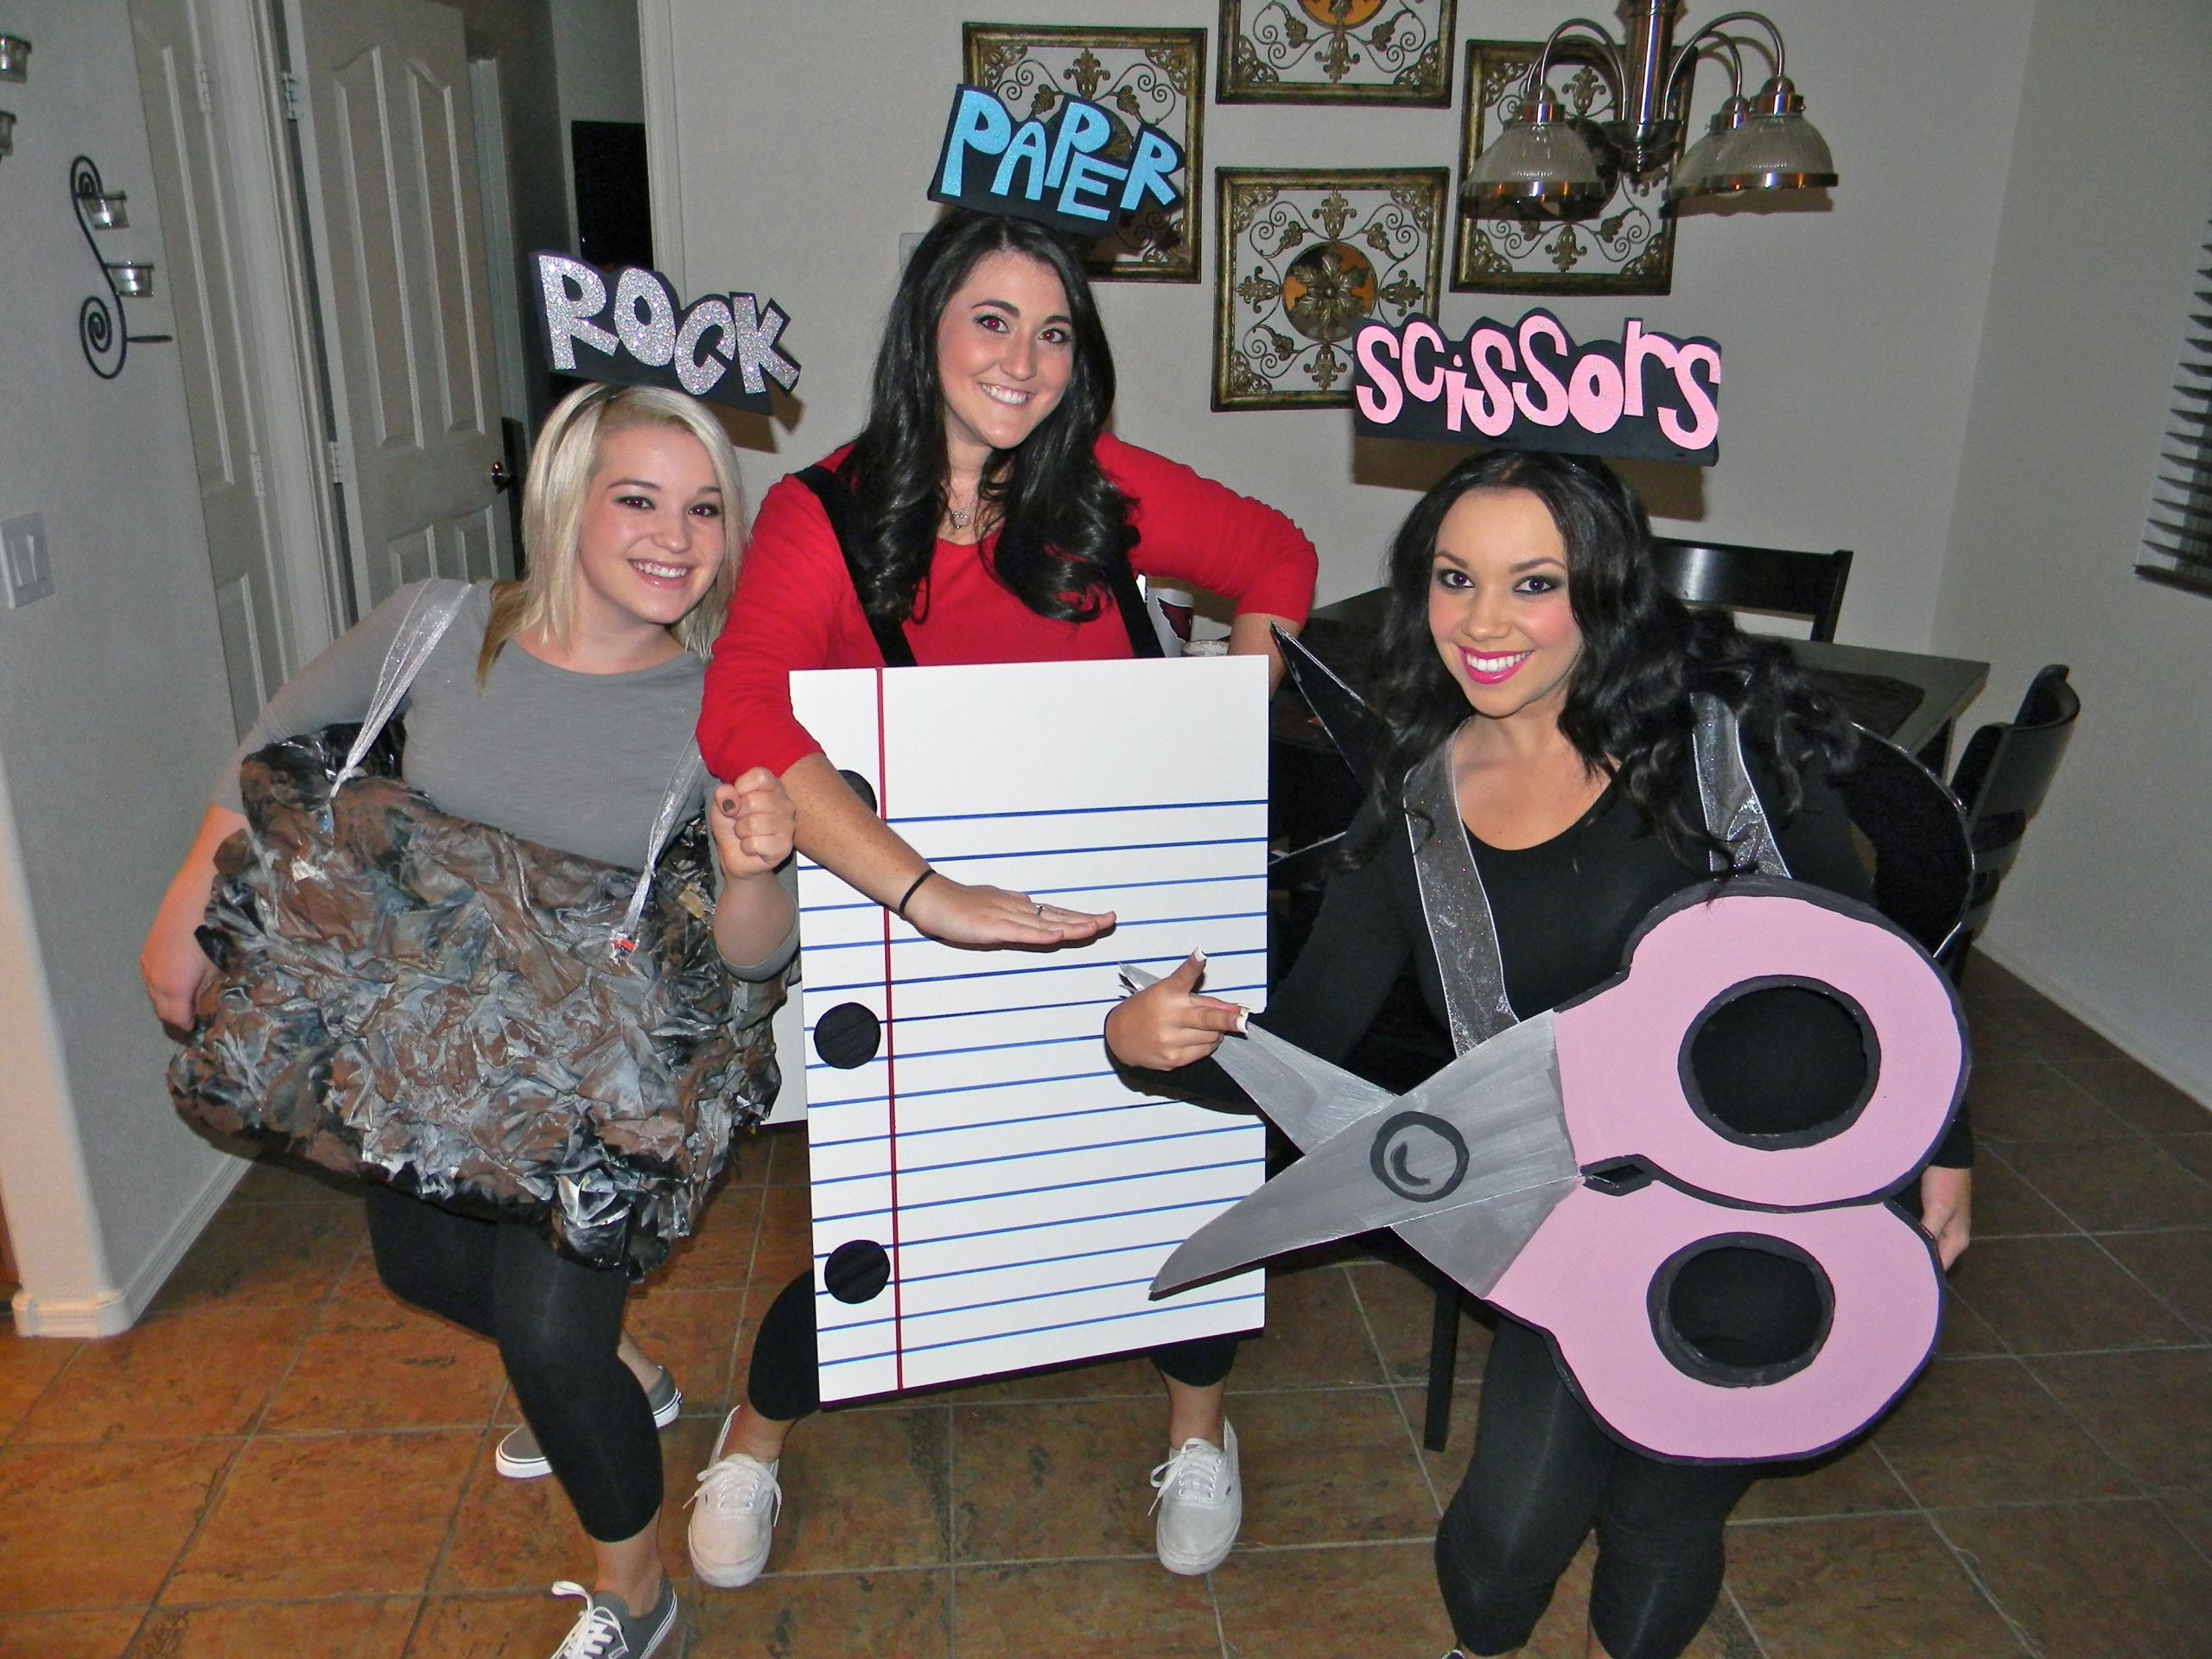 Rock Costume DIY
 10 Attractive Costume Ideas For Three People 2019